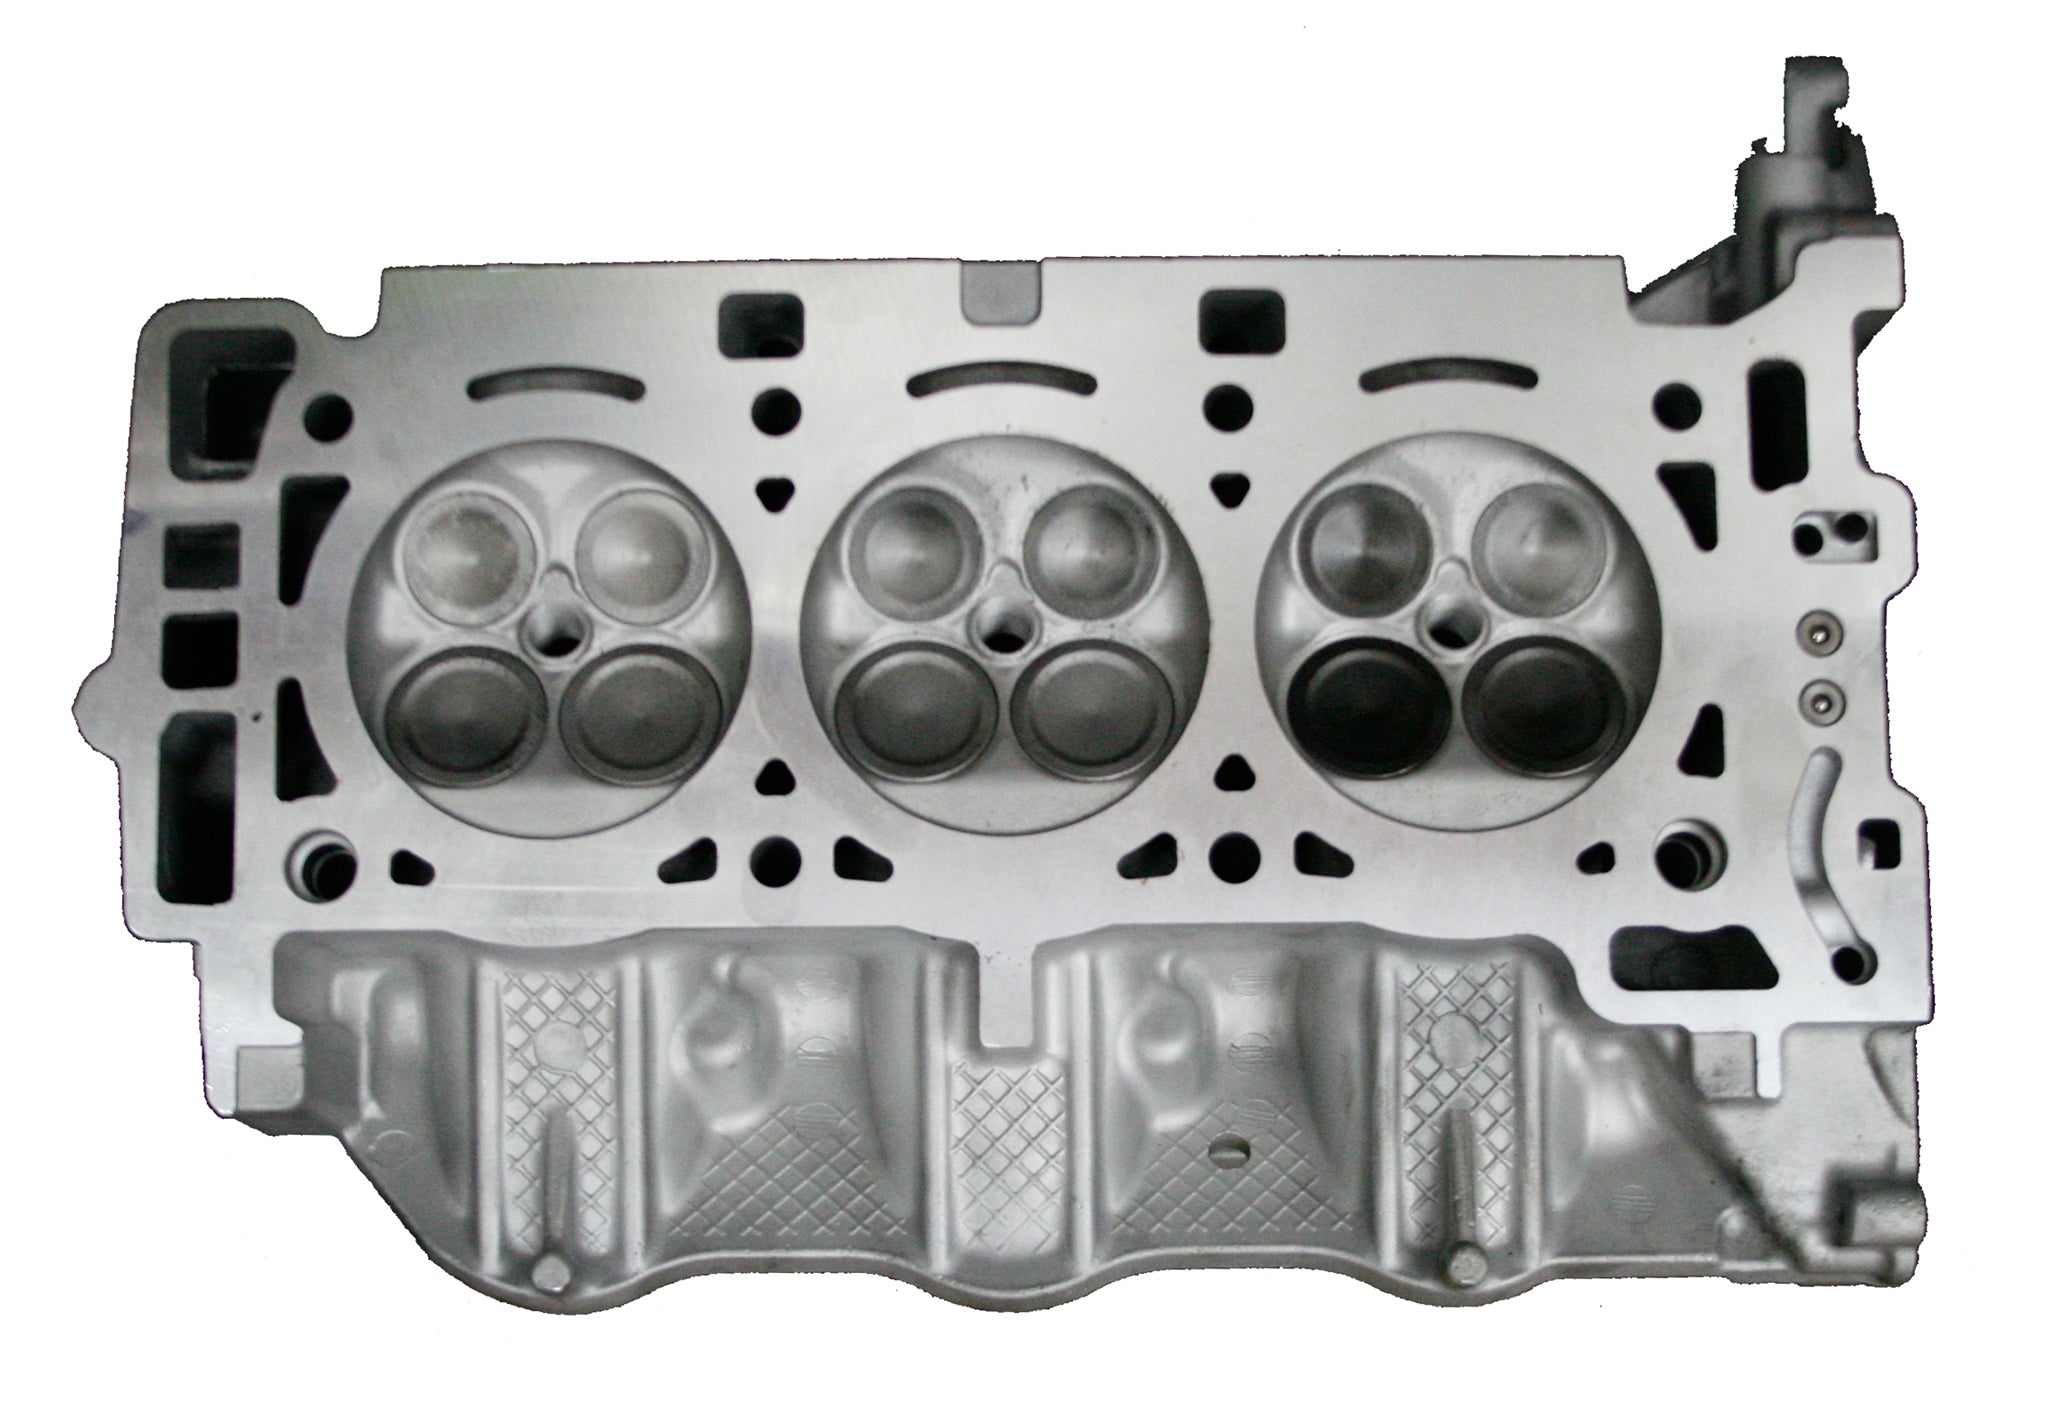 2004-2009 GM Chevy Cadillac 3.6L DOHC Right cylinder head casting # 12581596